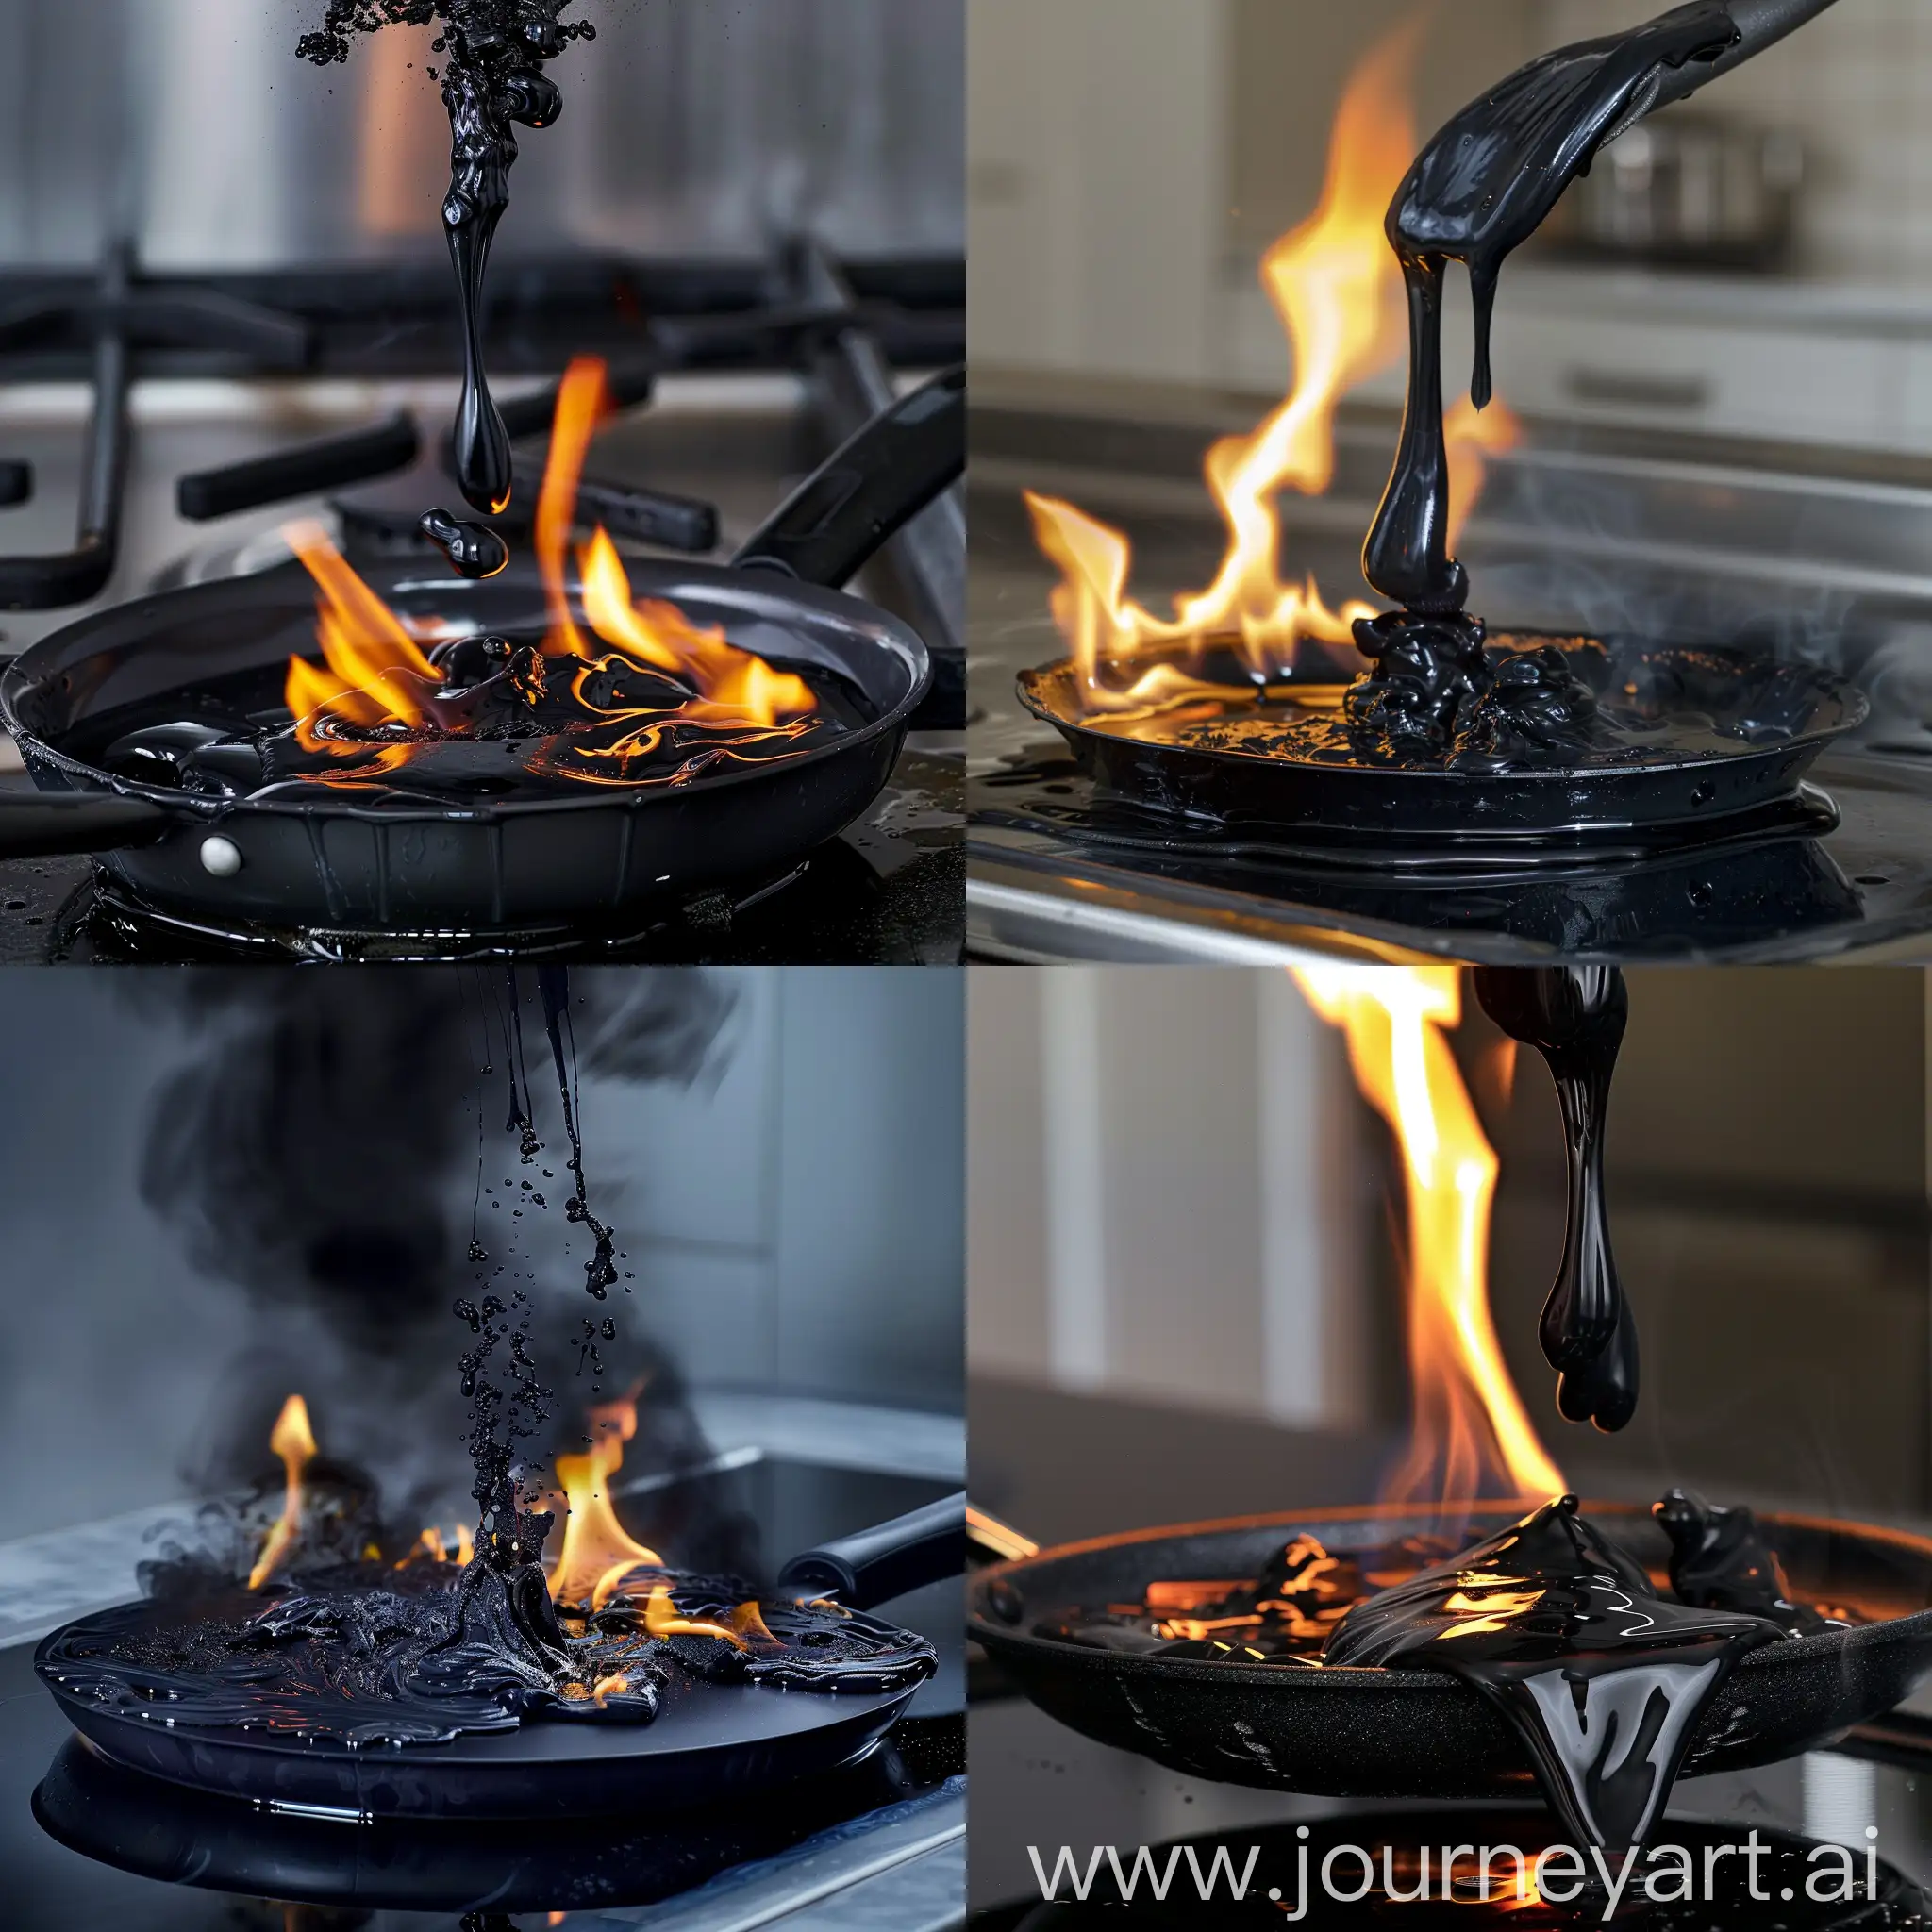 a frying pan, made of black plastic, melting over the flame on the hob. it's starting to drip melting plastic. the melted droplets are catching fire. it's creating a bit of black smoke. include a handle on the frying pan 